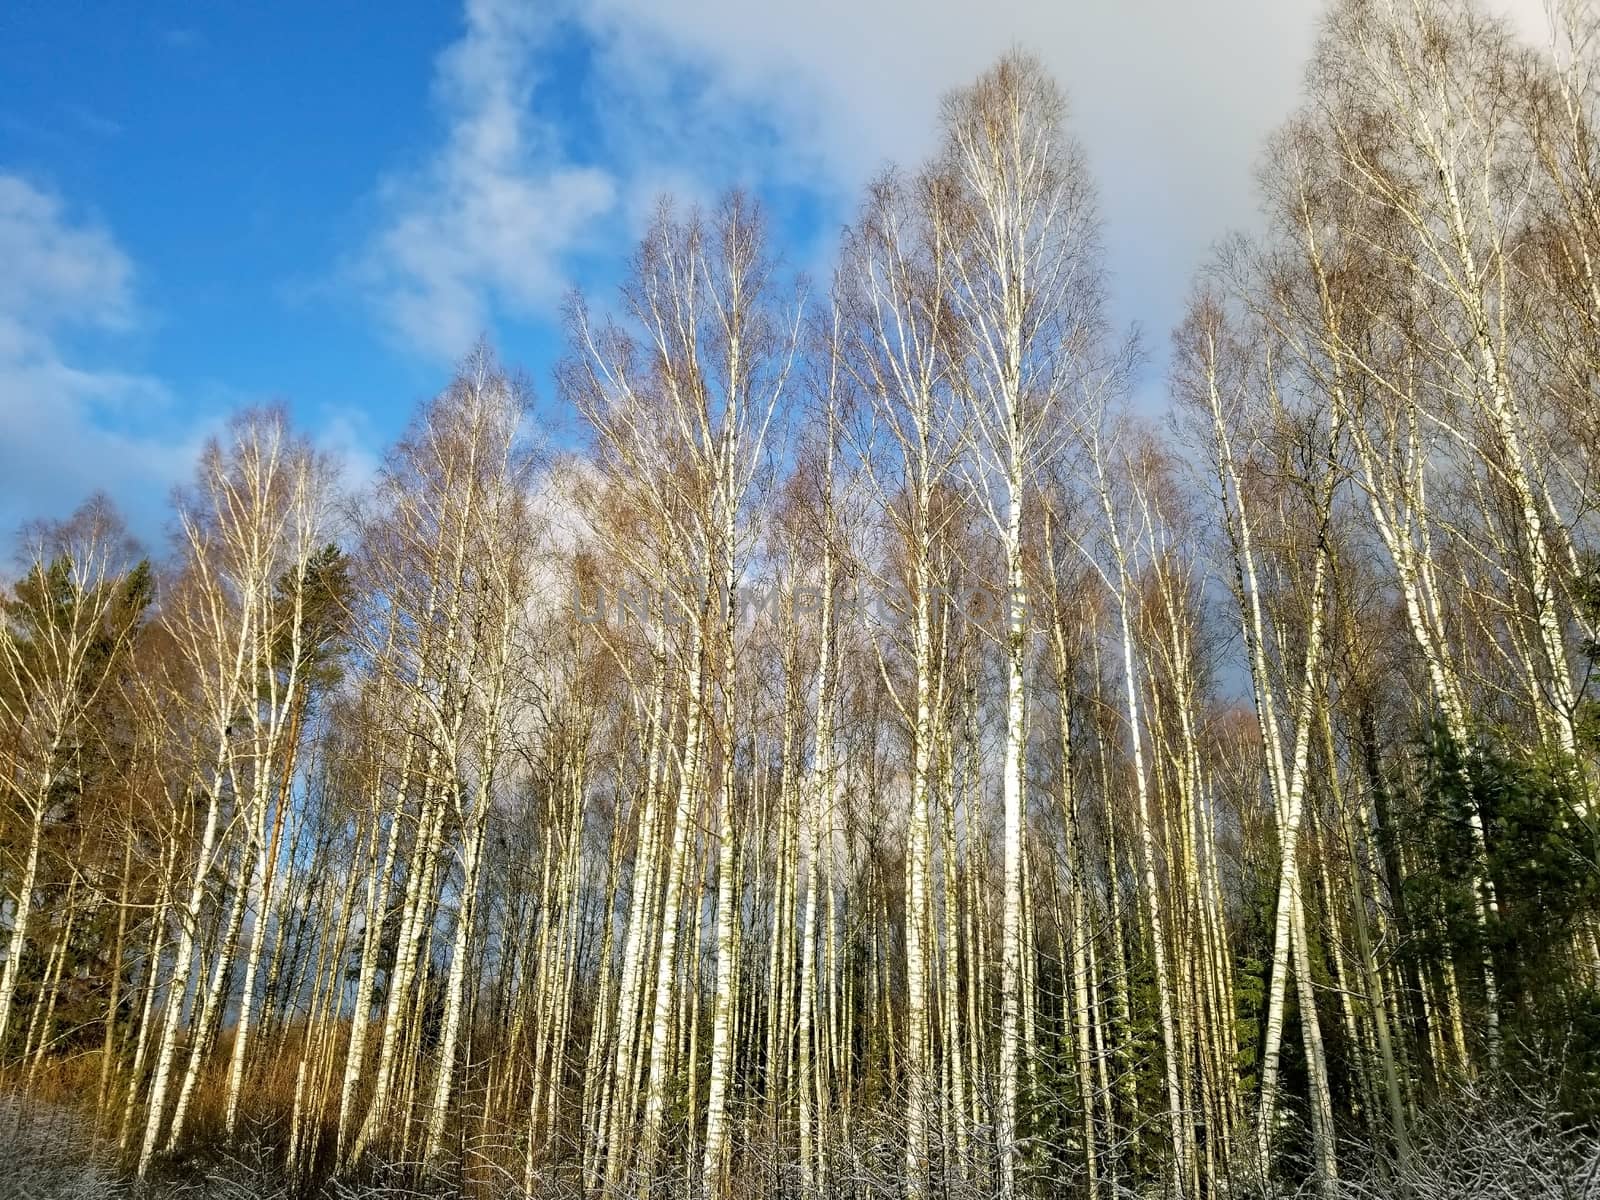 View of a winter birch forest against a blue sky.